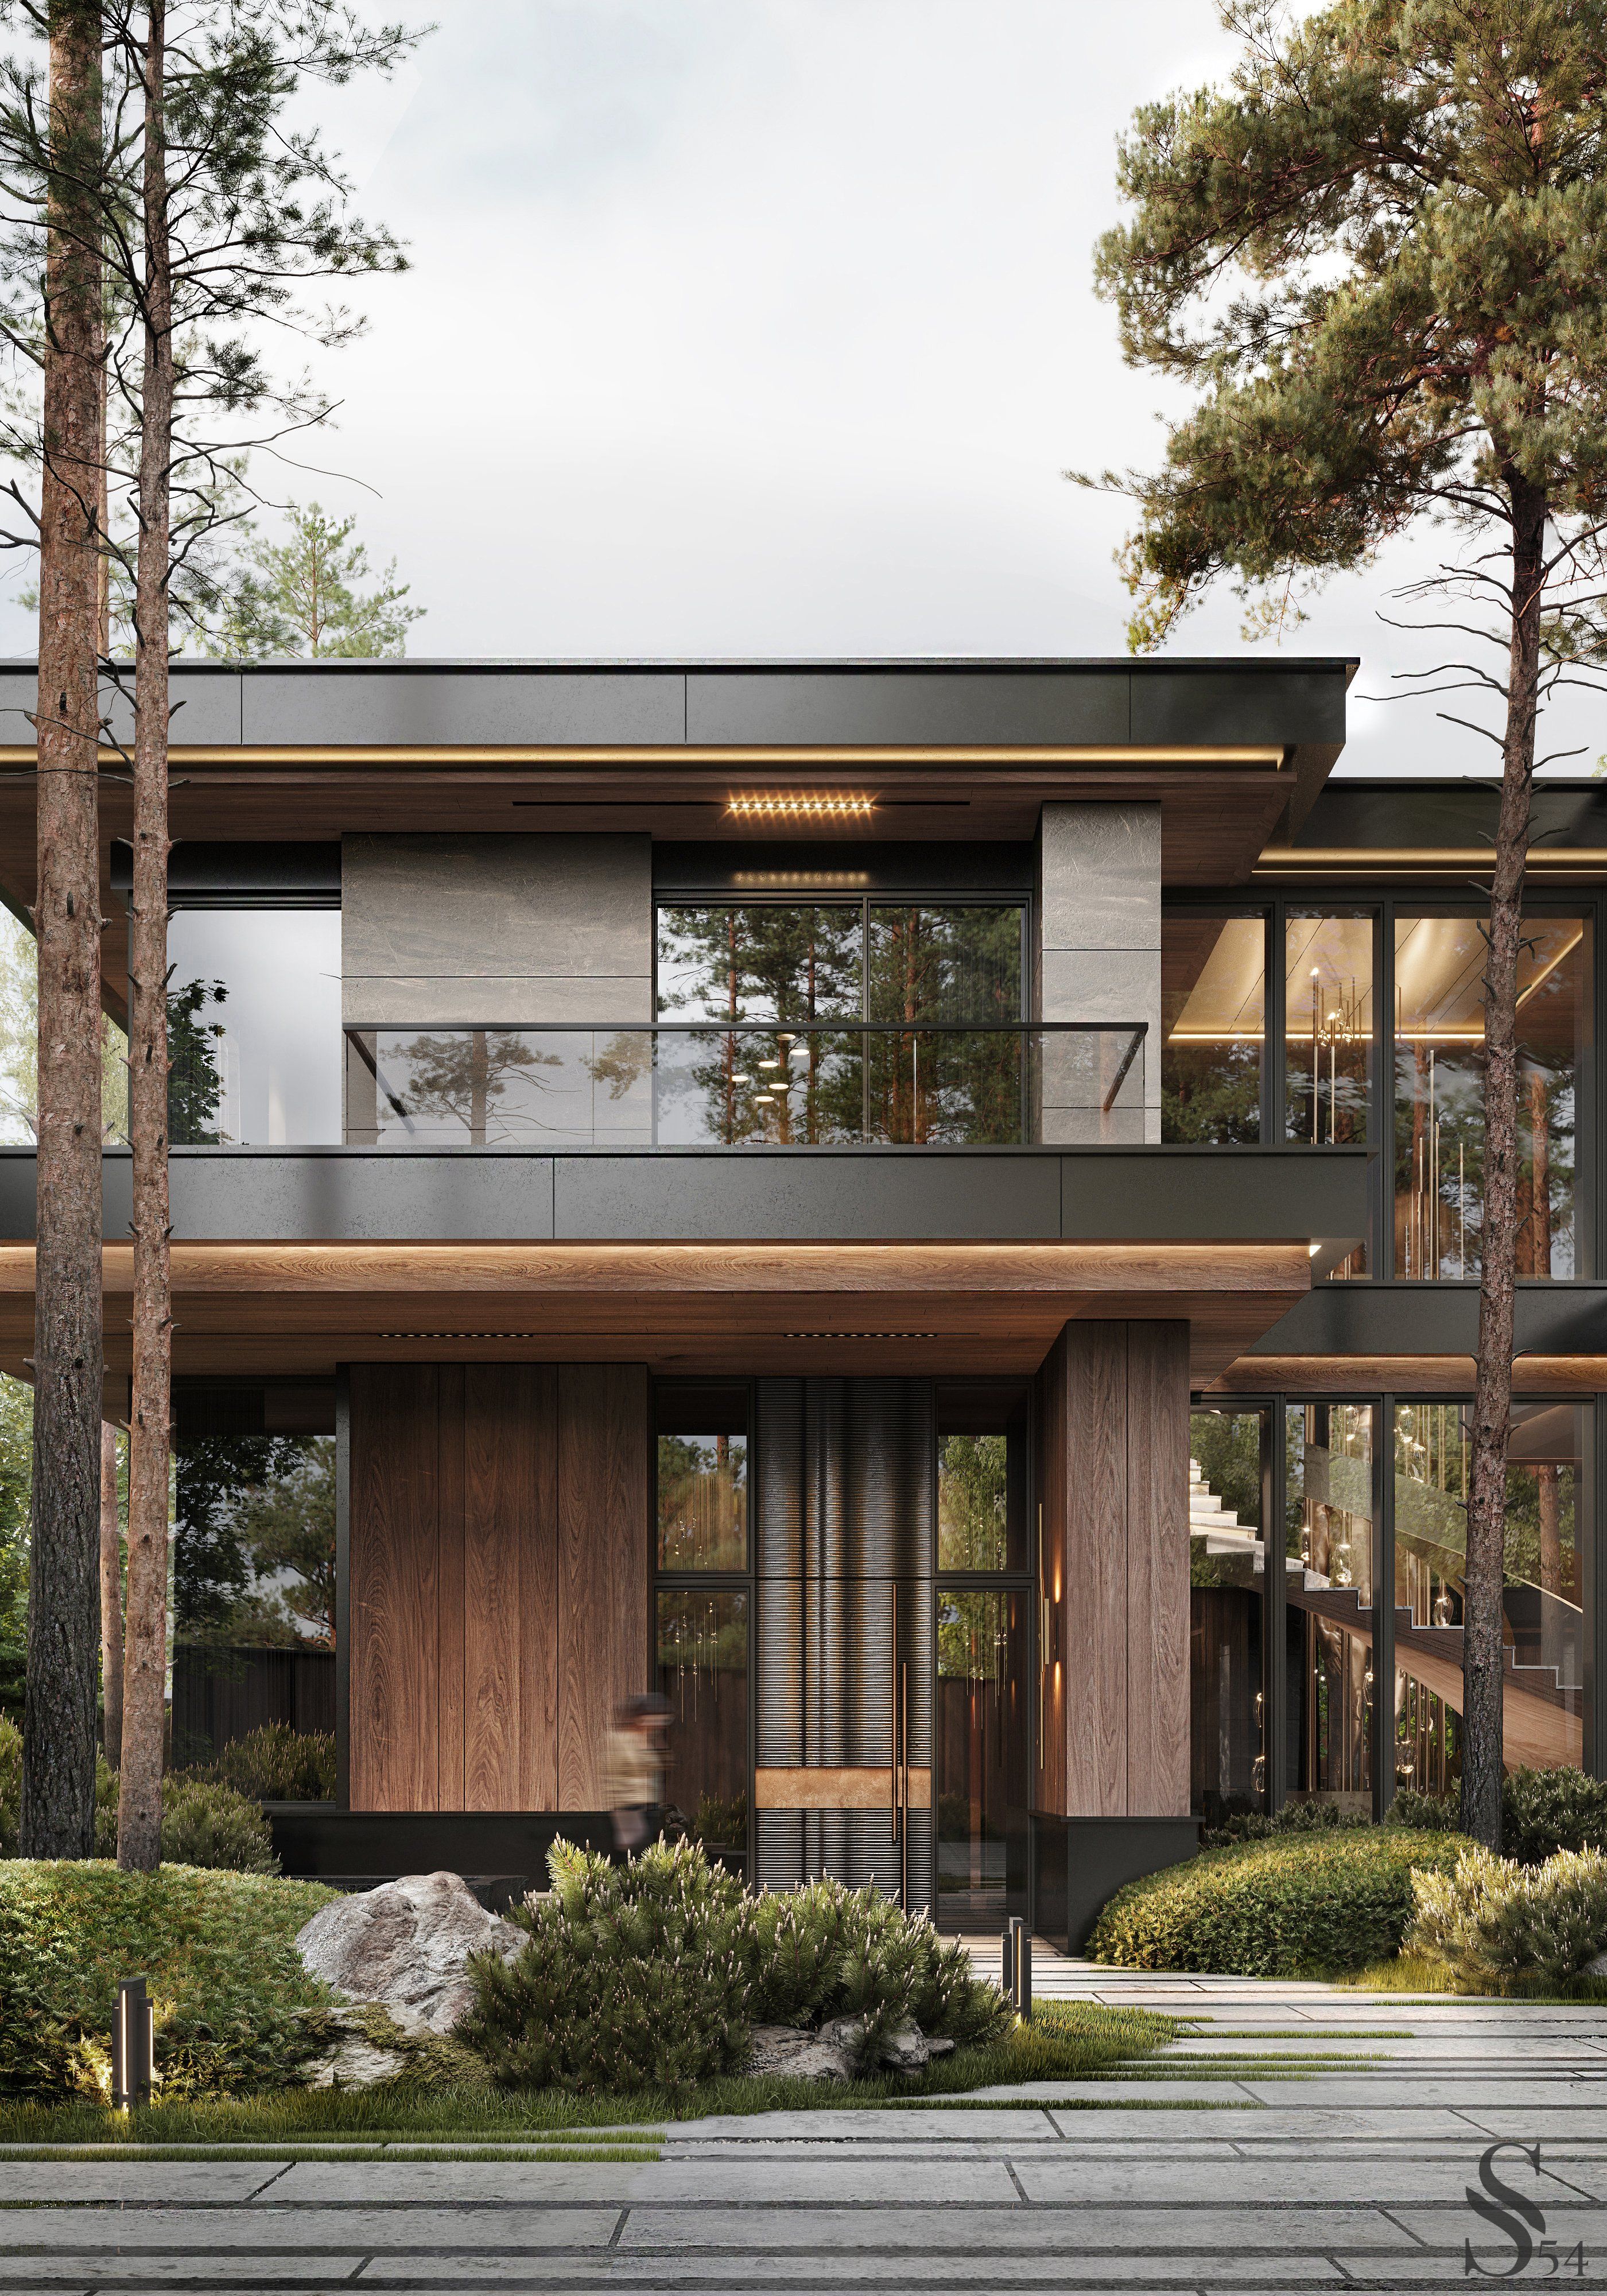 The facade of the house is made of thermally treated wood, ceramic granite, and metal.





